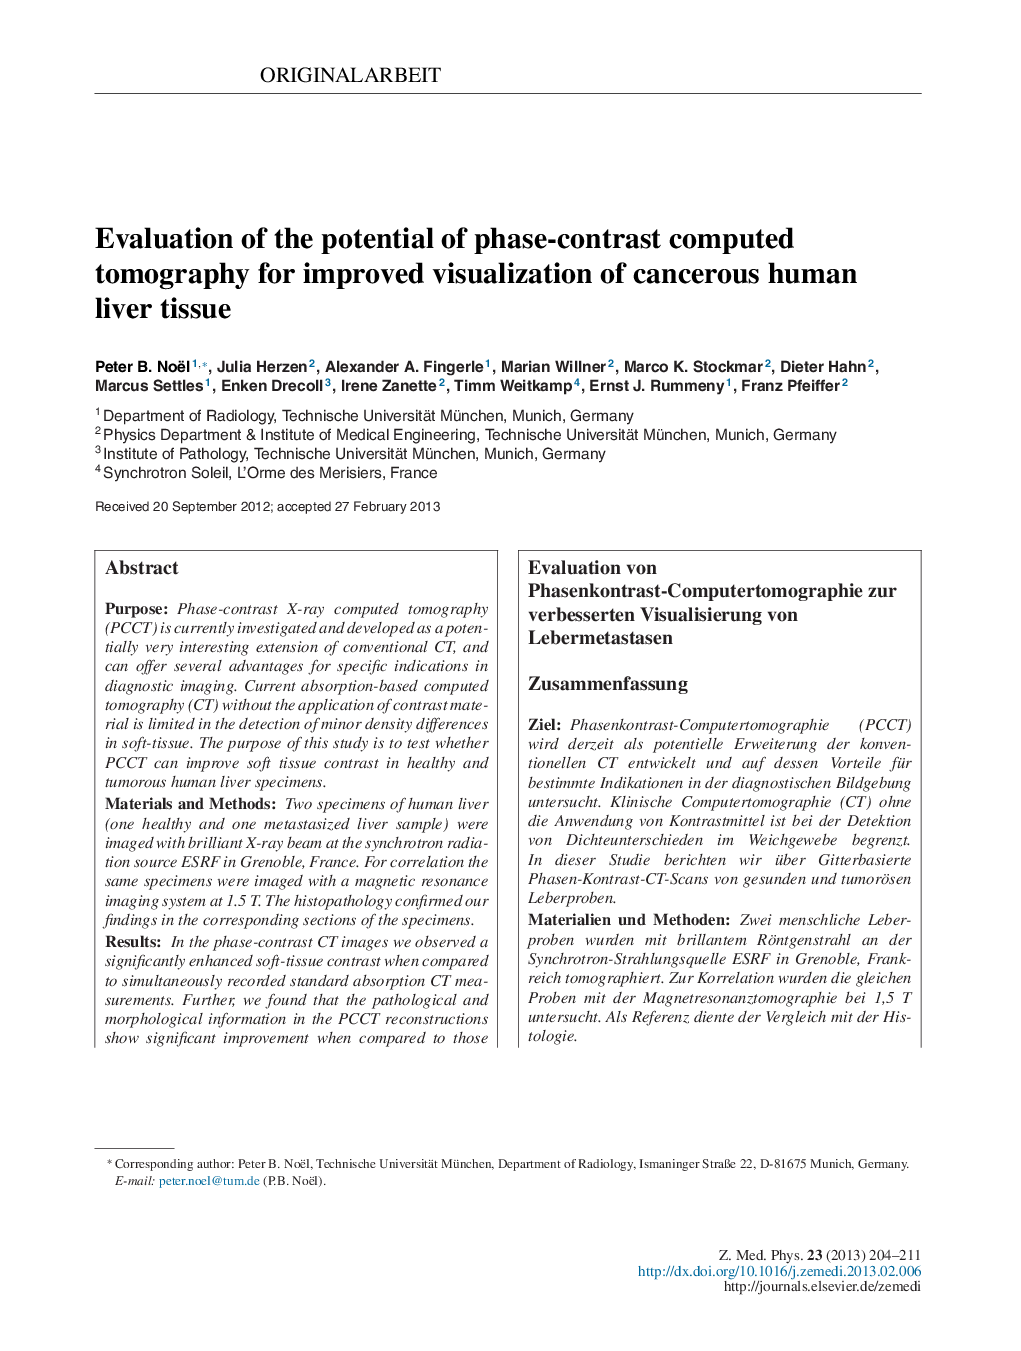 Evaluation of the potential of phase-contrast computed tomography for improved visualization of cancerous human liver tissue